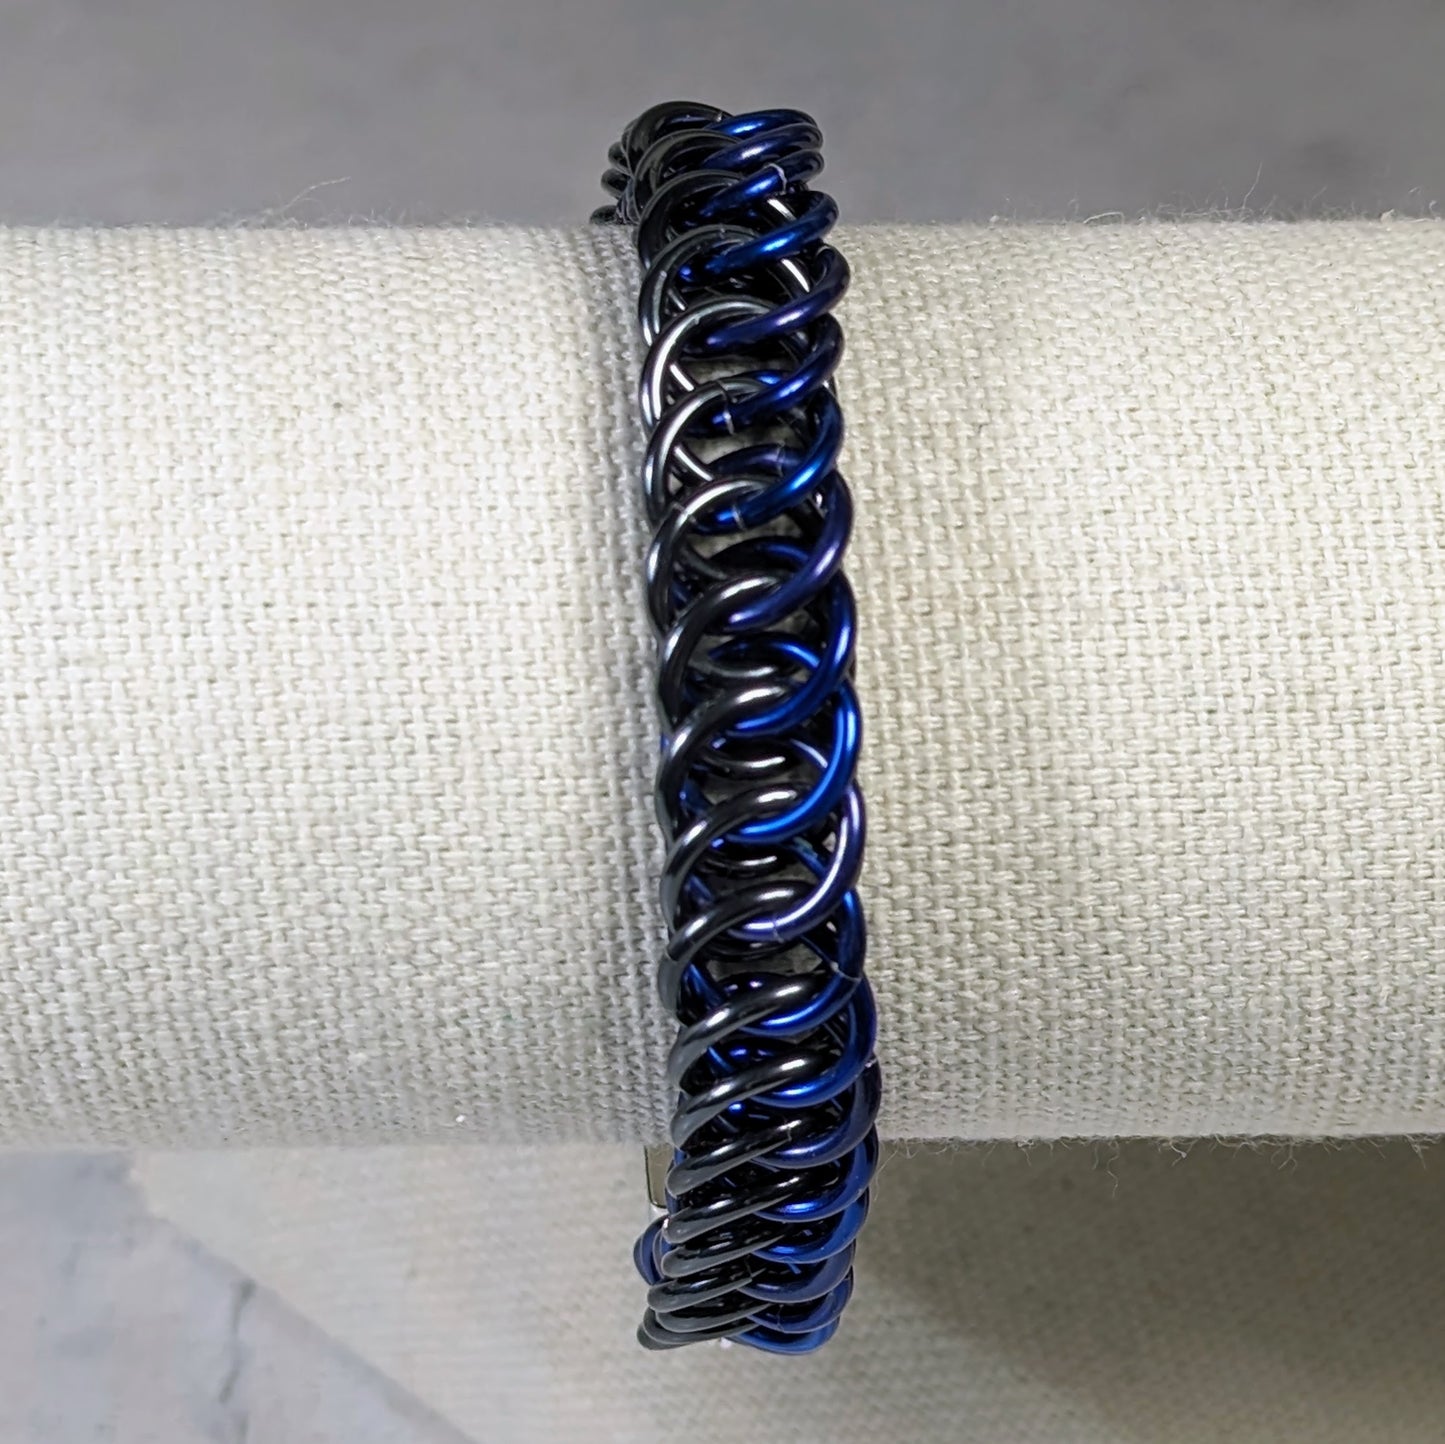 Blues and black chainmaille bracelet